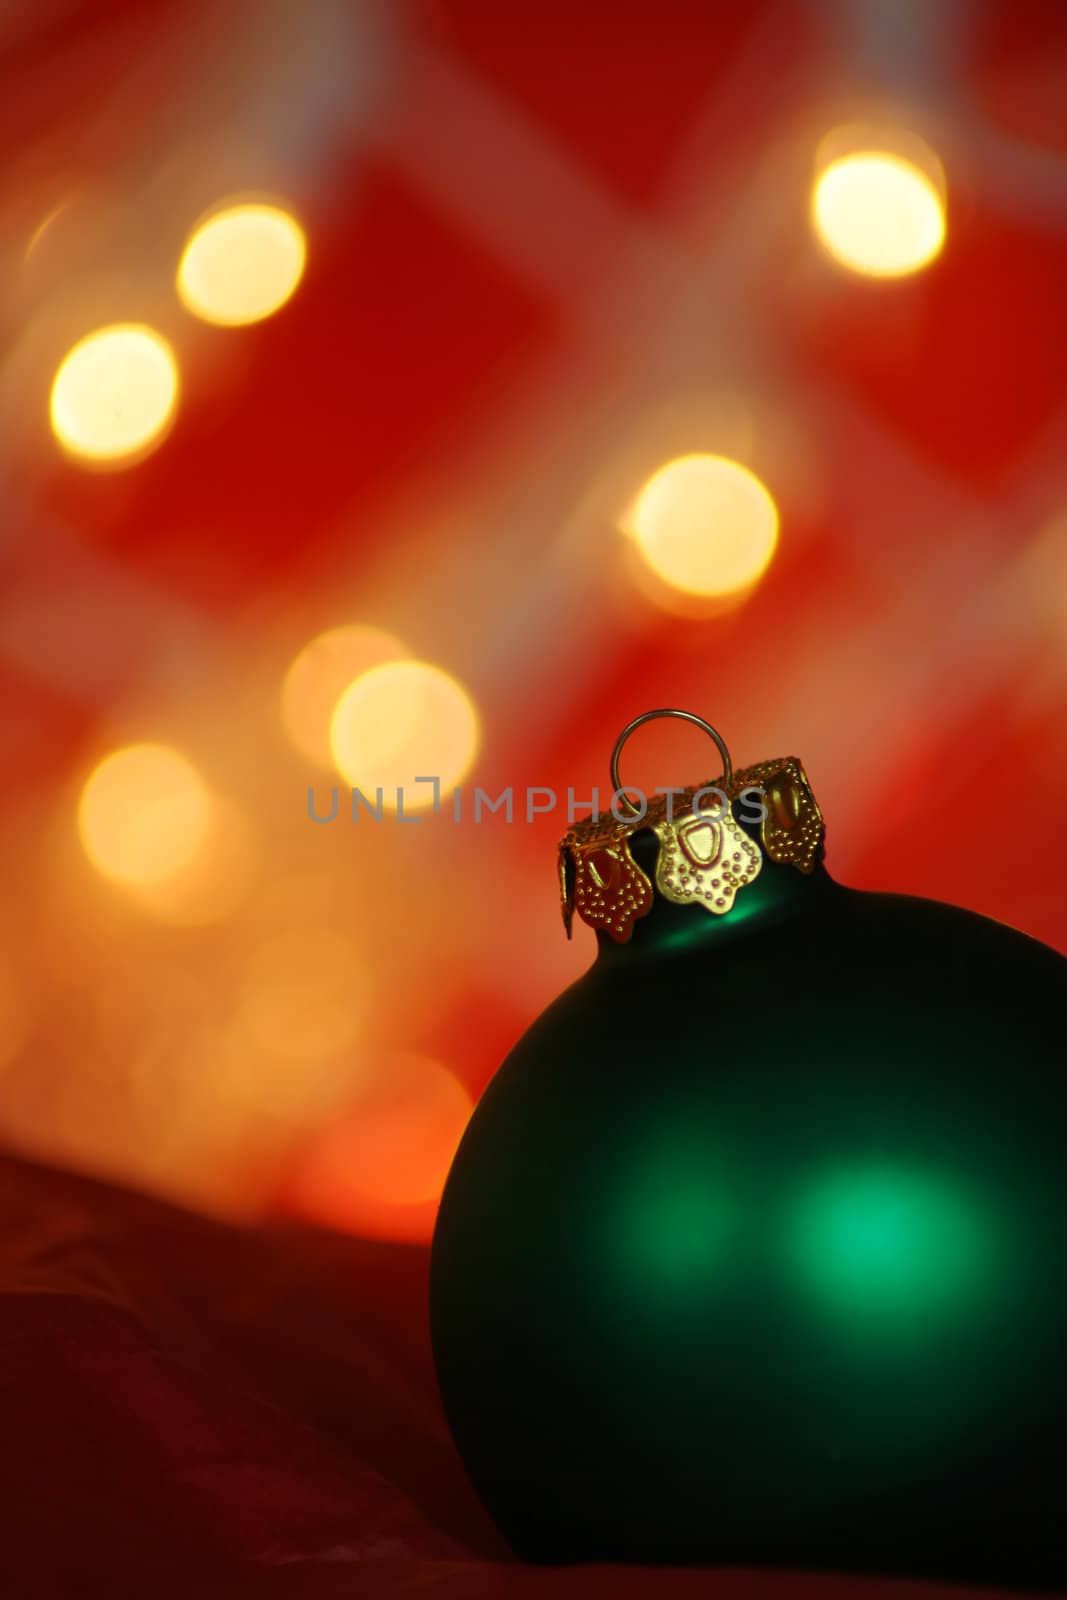 green christmas ornament with copy space.

